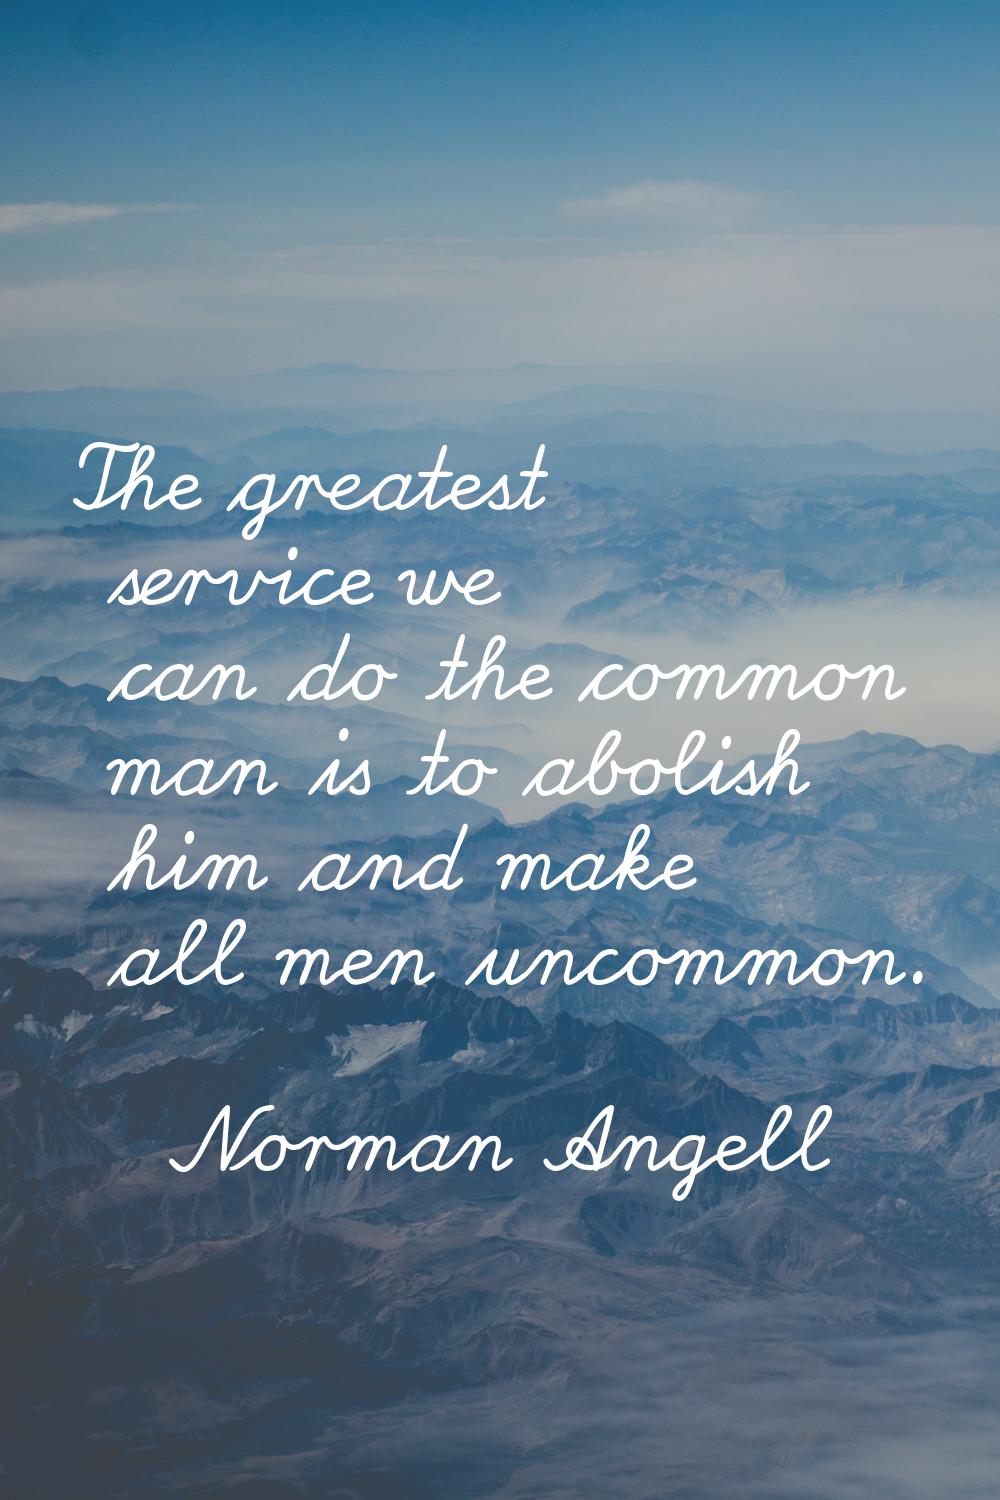 The greatest service we can do the common man is to abolish him and make all men uncommon.